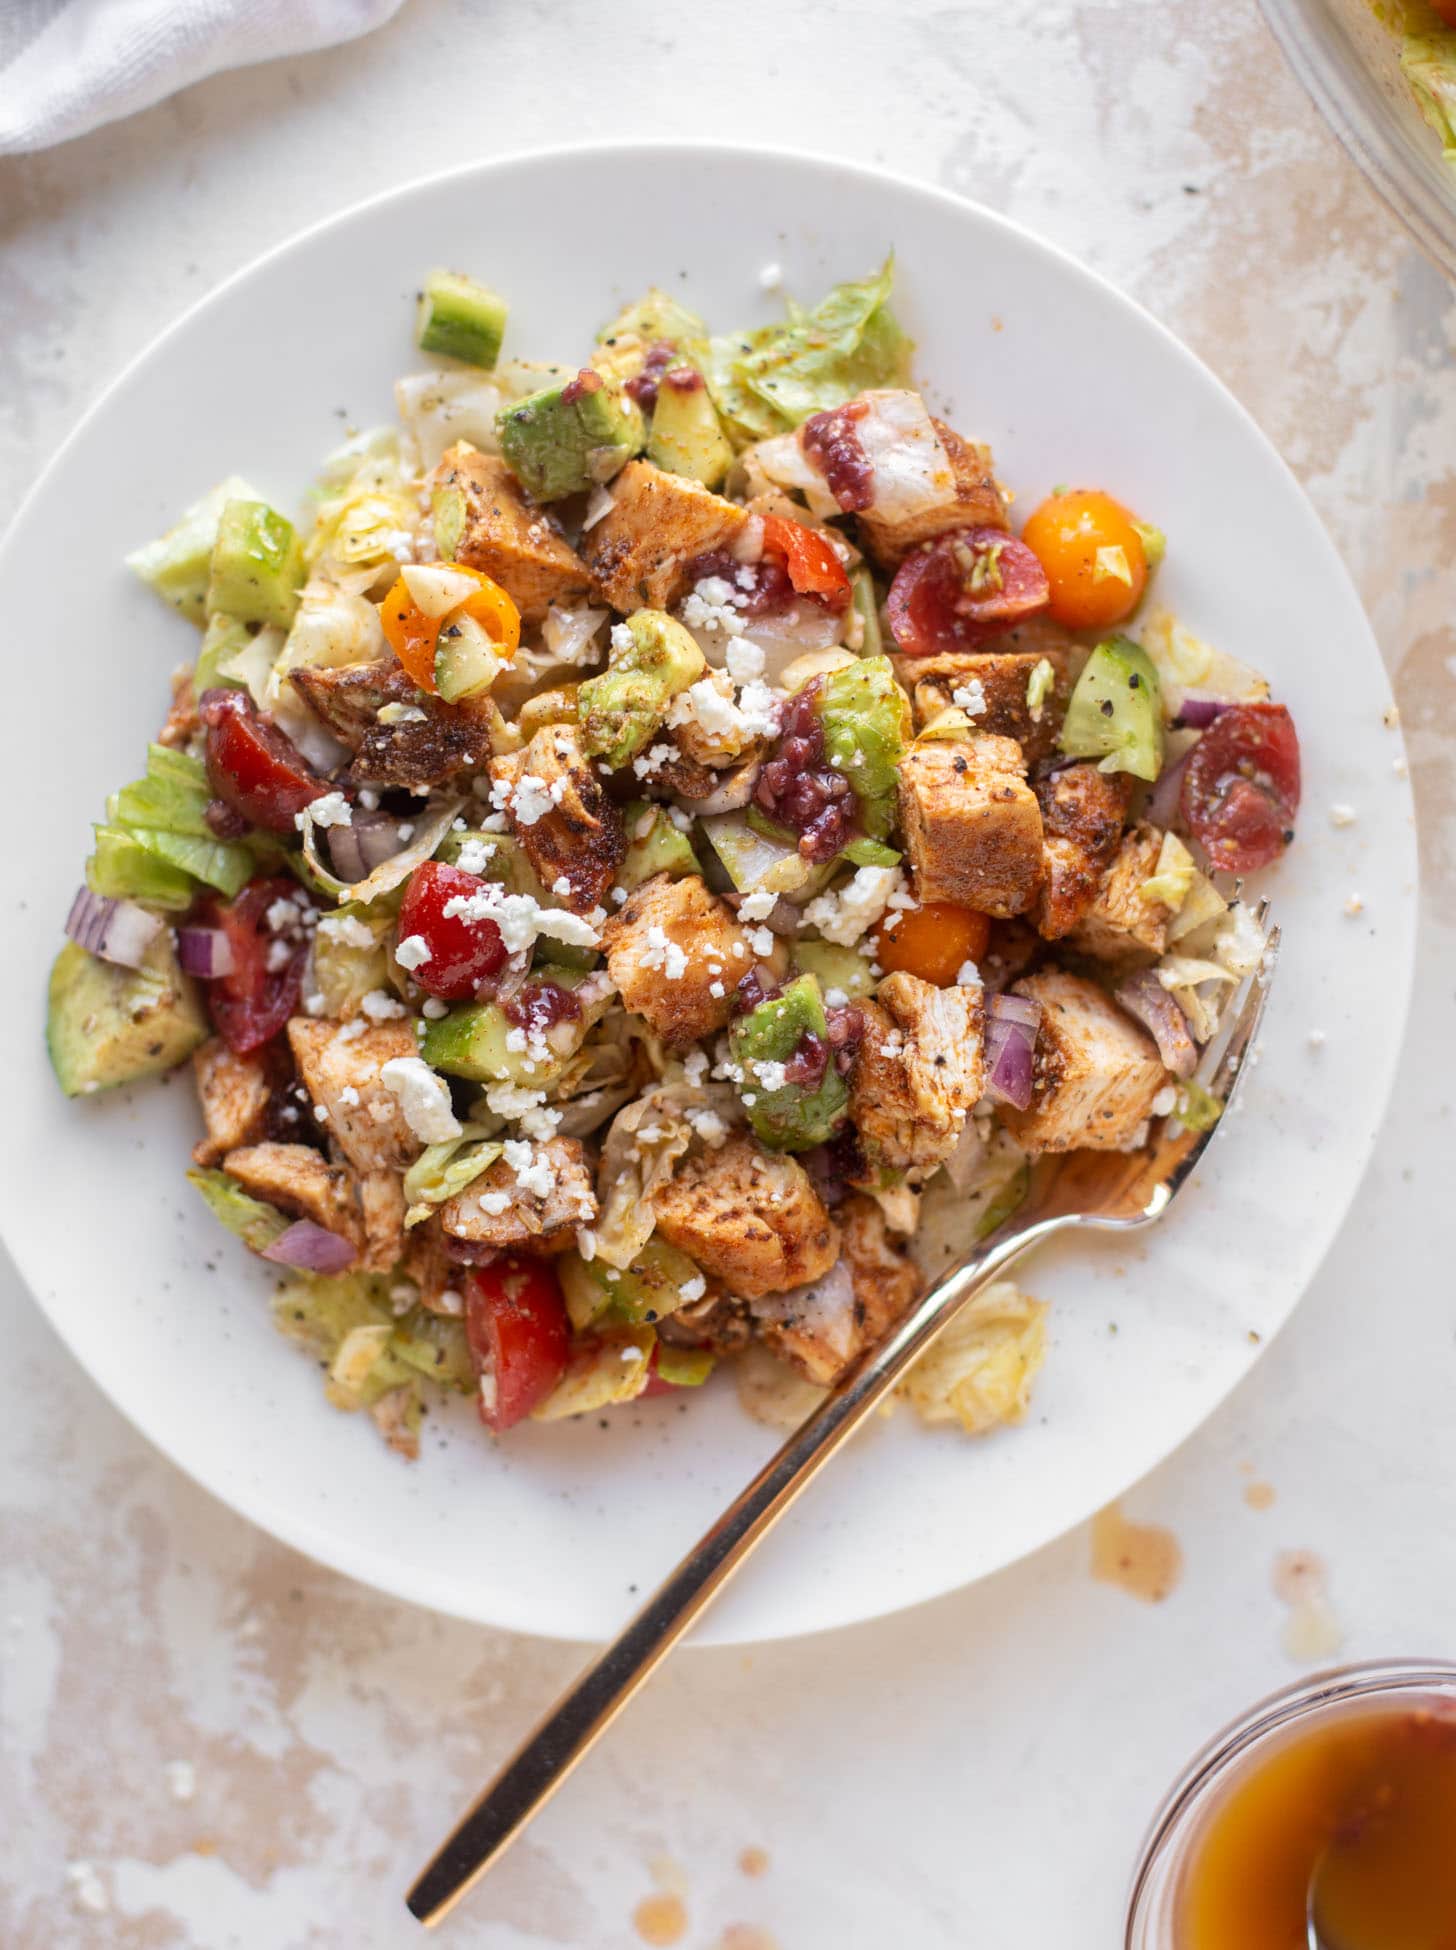 Blackened Chicken Chopped Salad with Raspberry Chipotle Vinaigrette.